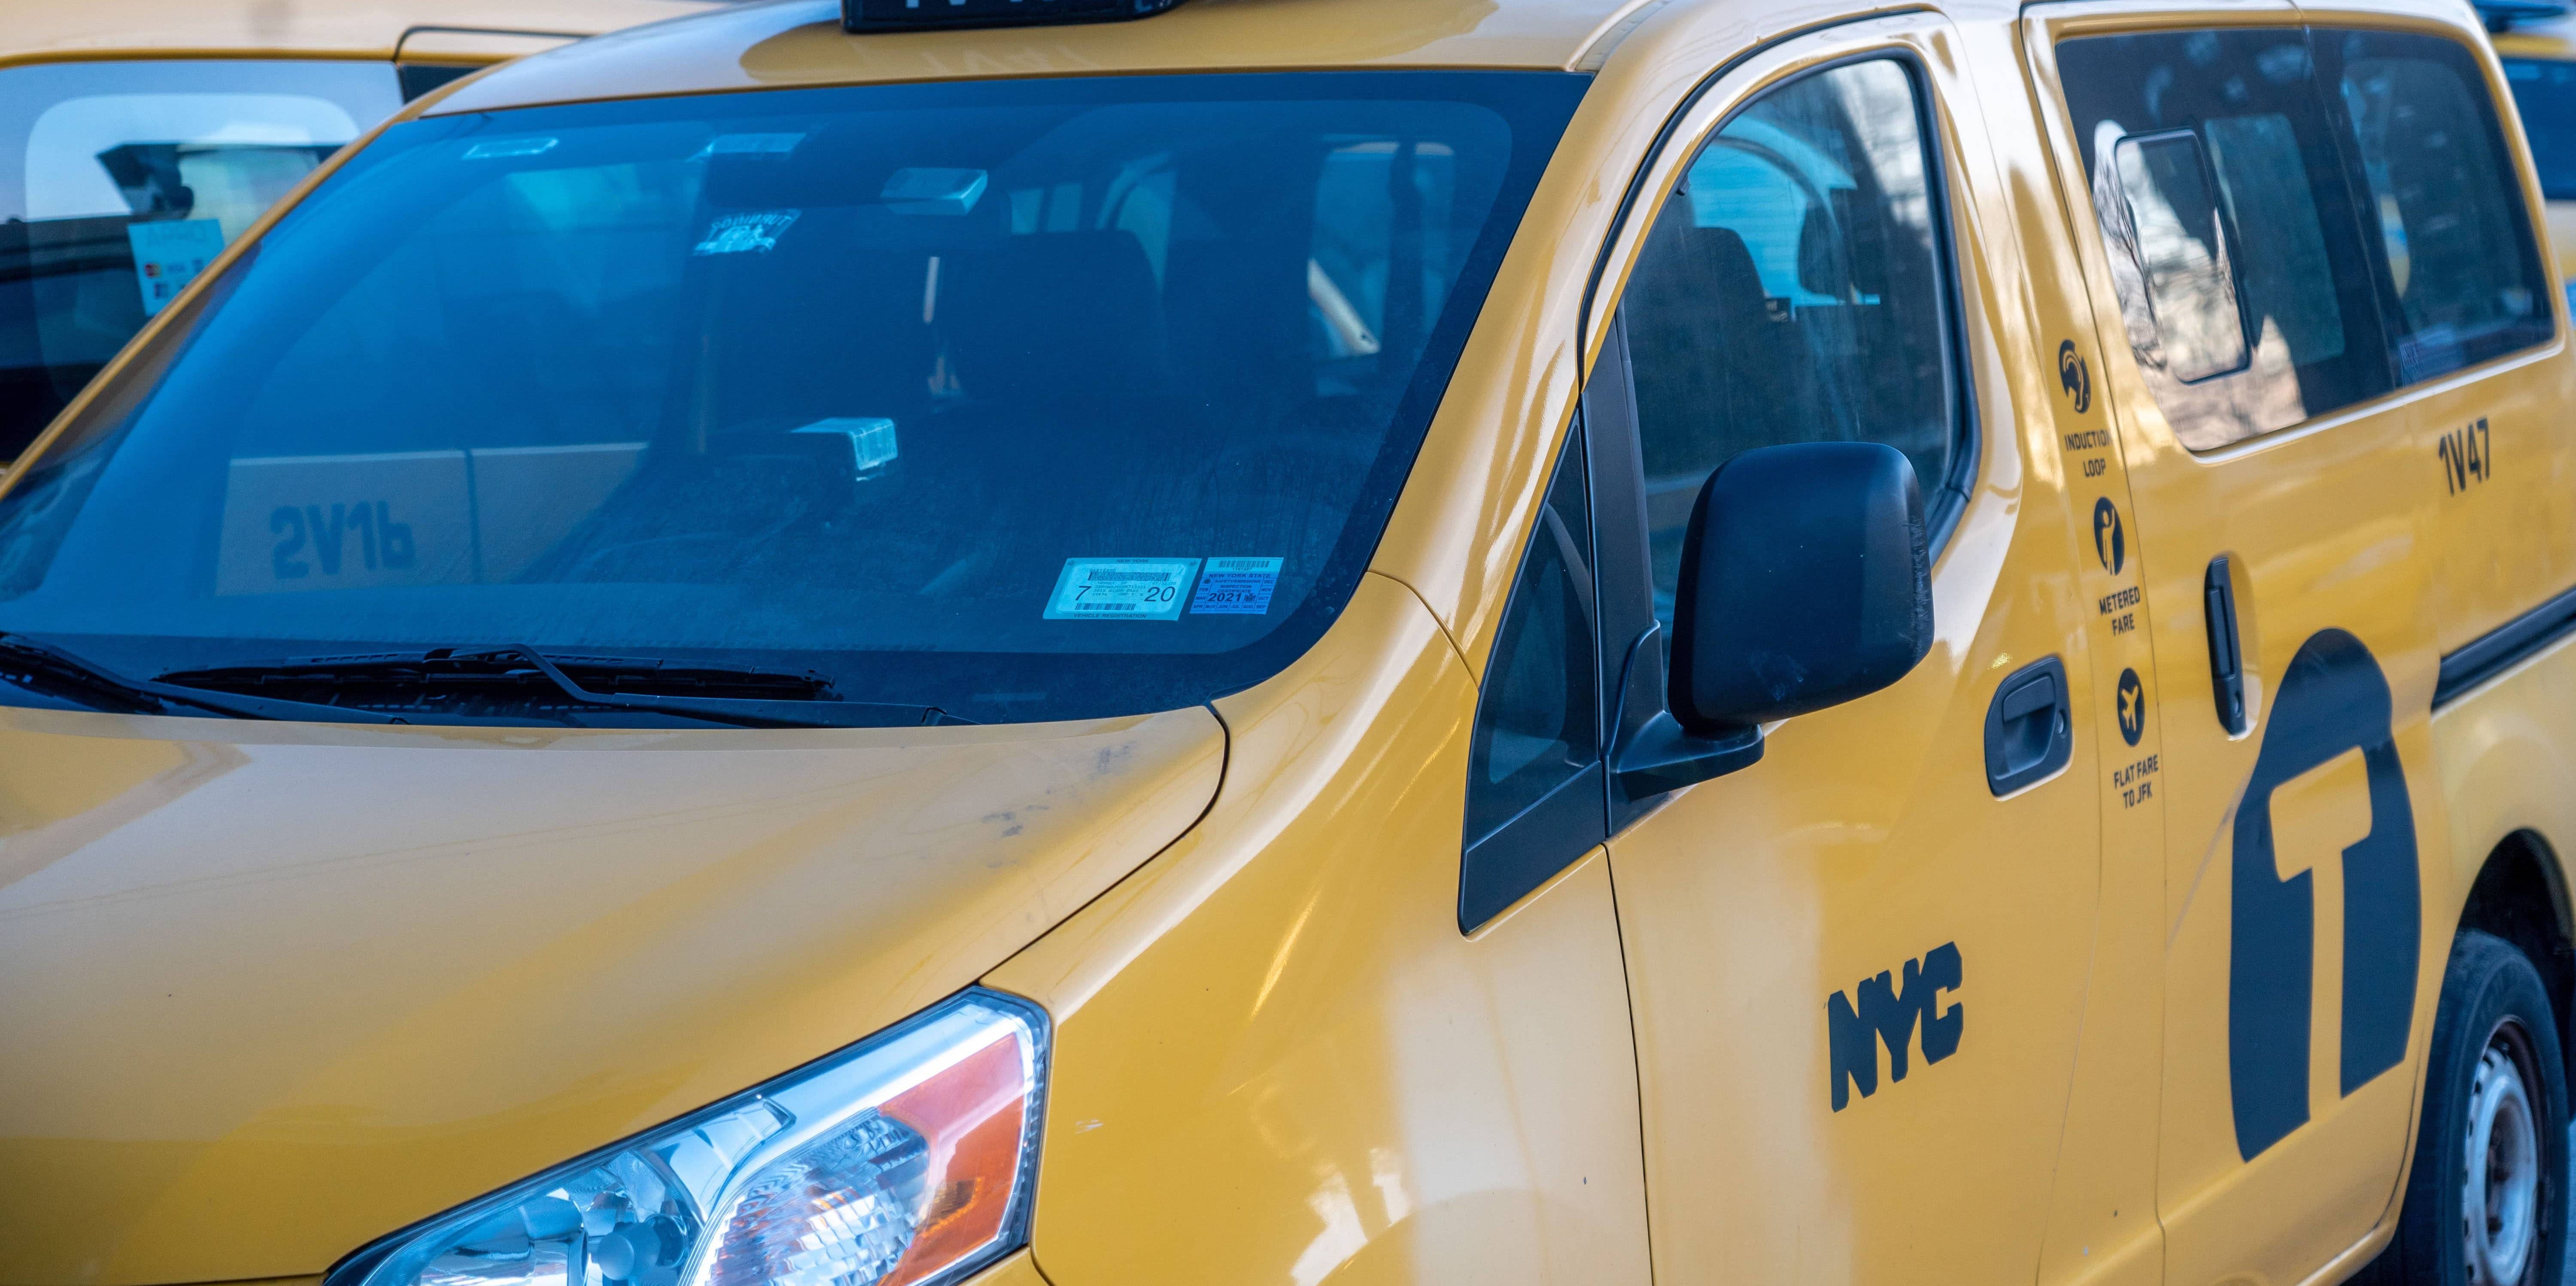 nyc-launches-taxi-medallion-relief-fund-in-new-york-us-09-mar-2021